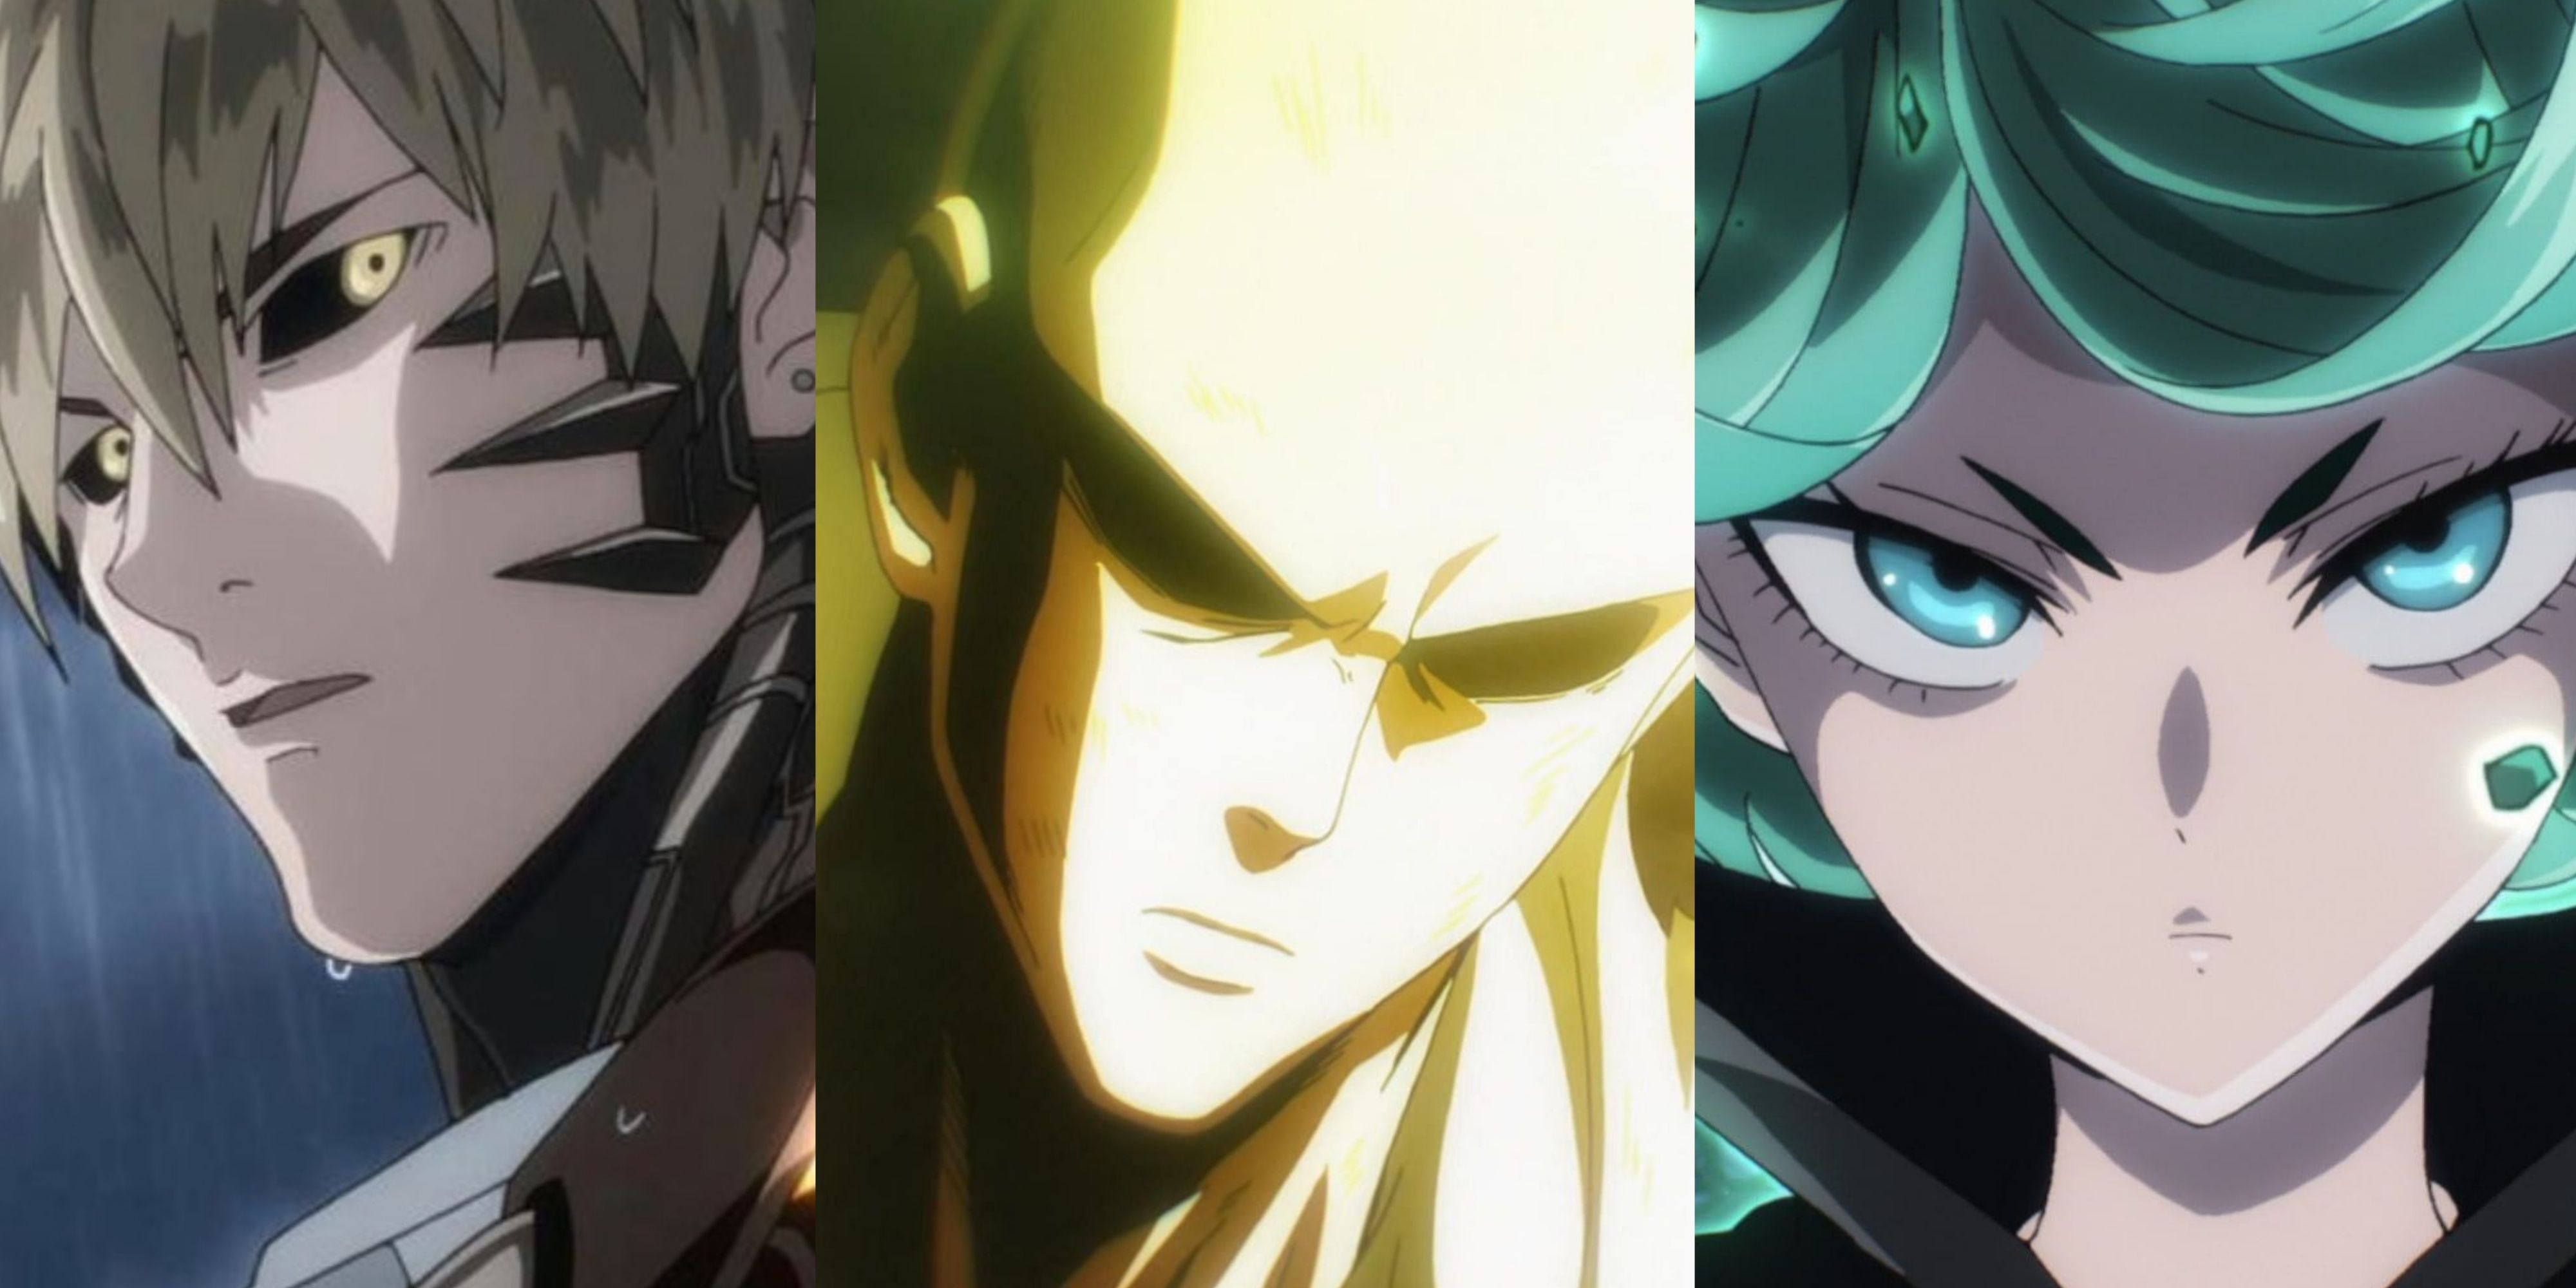 One-Punch Man' Is the Hero Manga And Anime Deserves